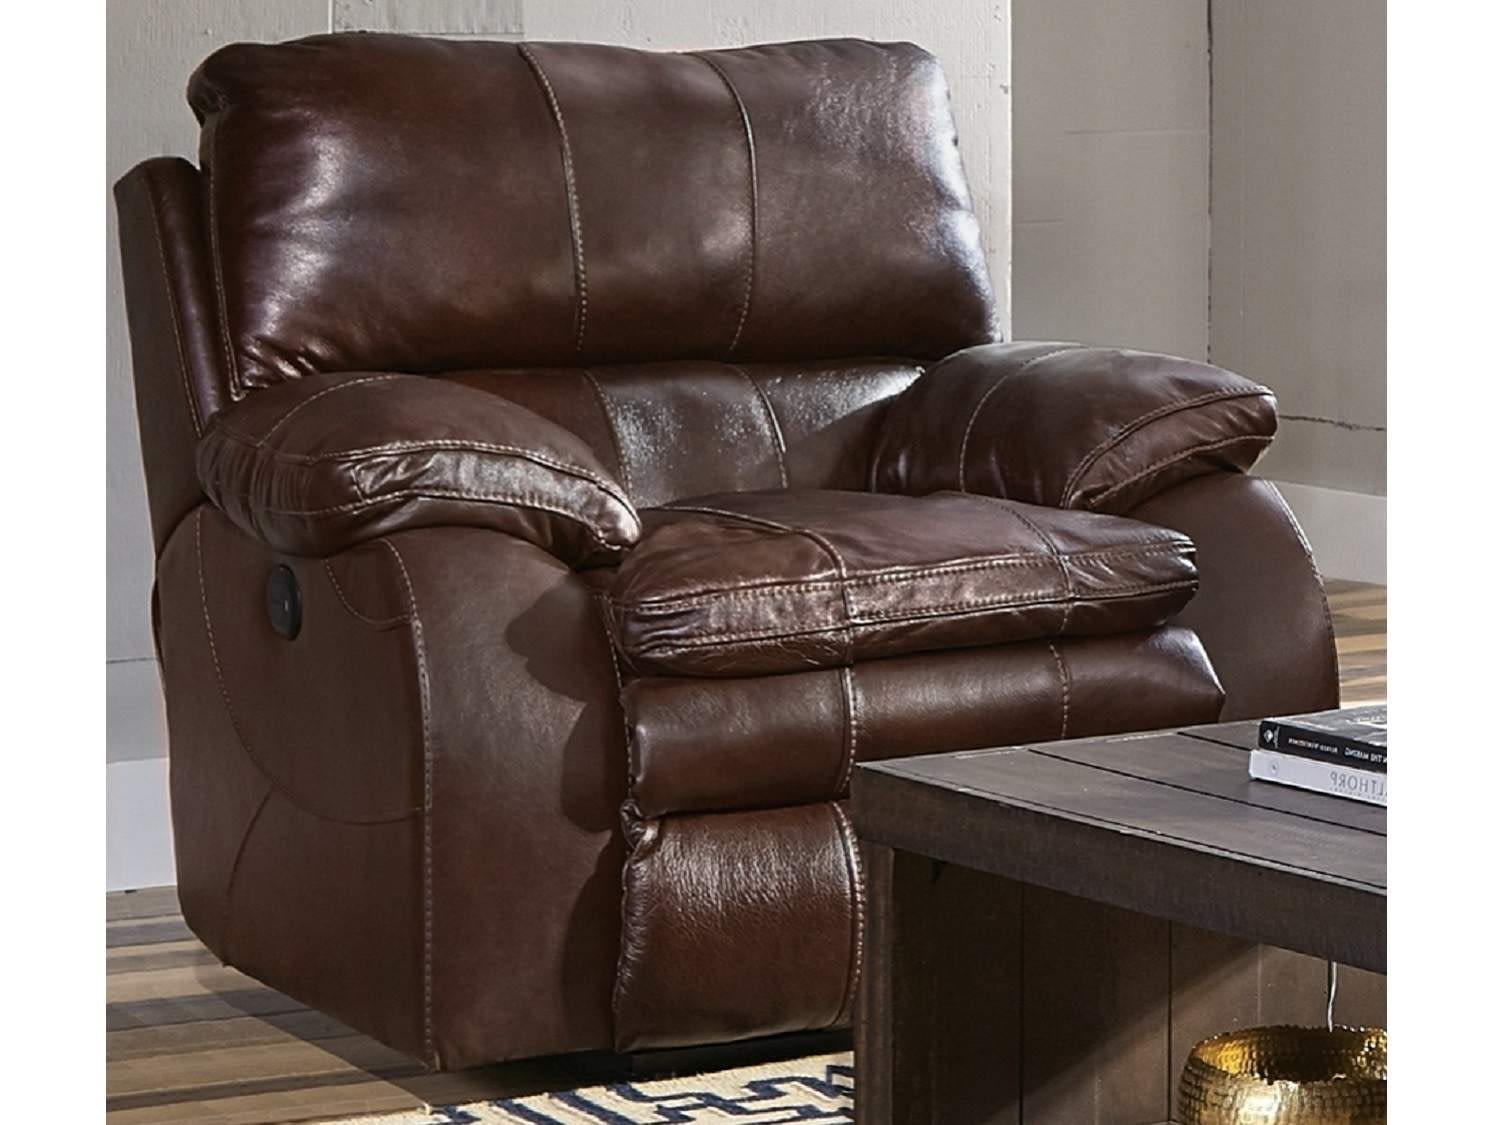 HOLLIS Leather Recliner Chair